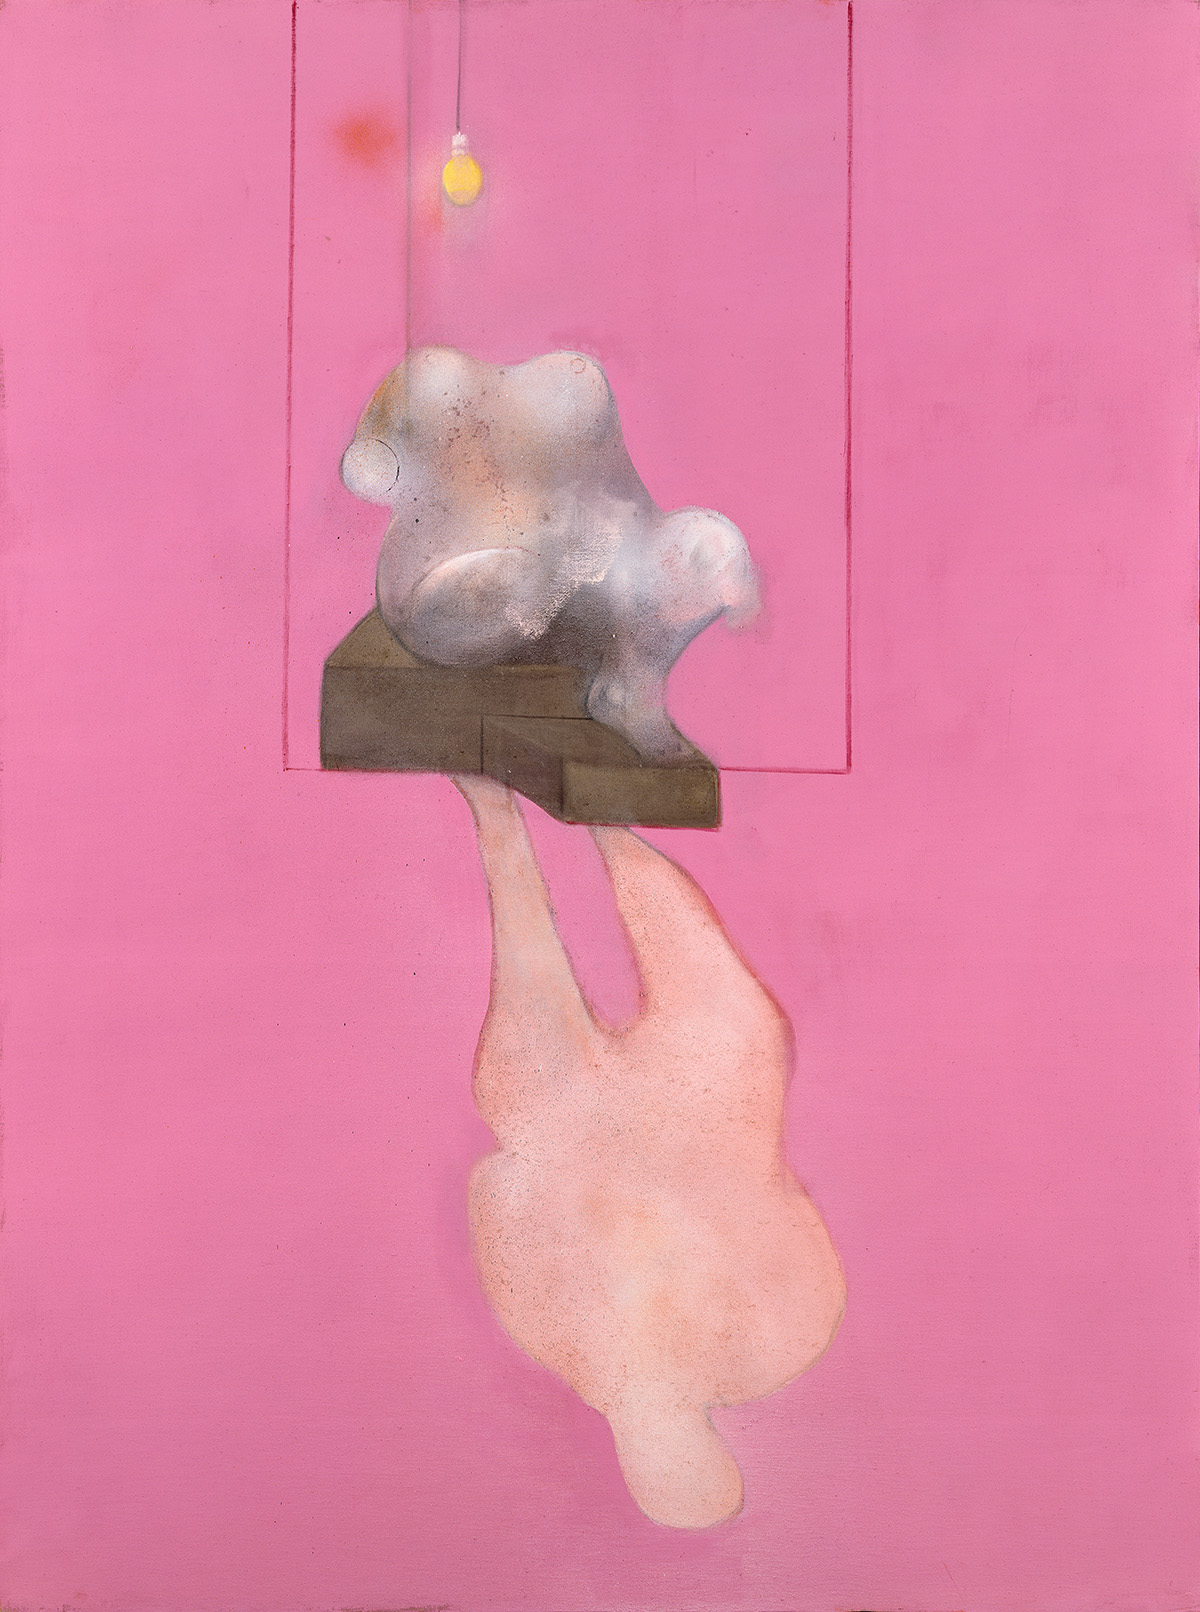 Francis Bacon, Still-Life – Broken Statue and Shadow, 1984. Oil, pastel and aerosol paint on canvas. CR number 84-01. © The Estate of Francis Bacon / DACS London 2020. All rights reserved.